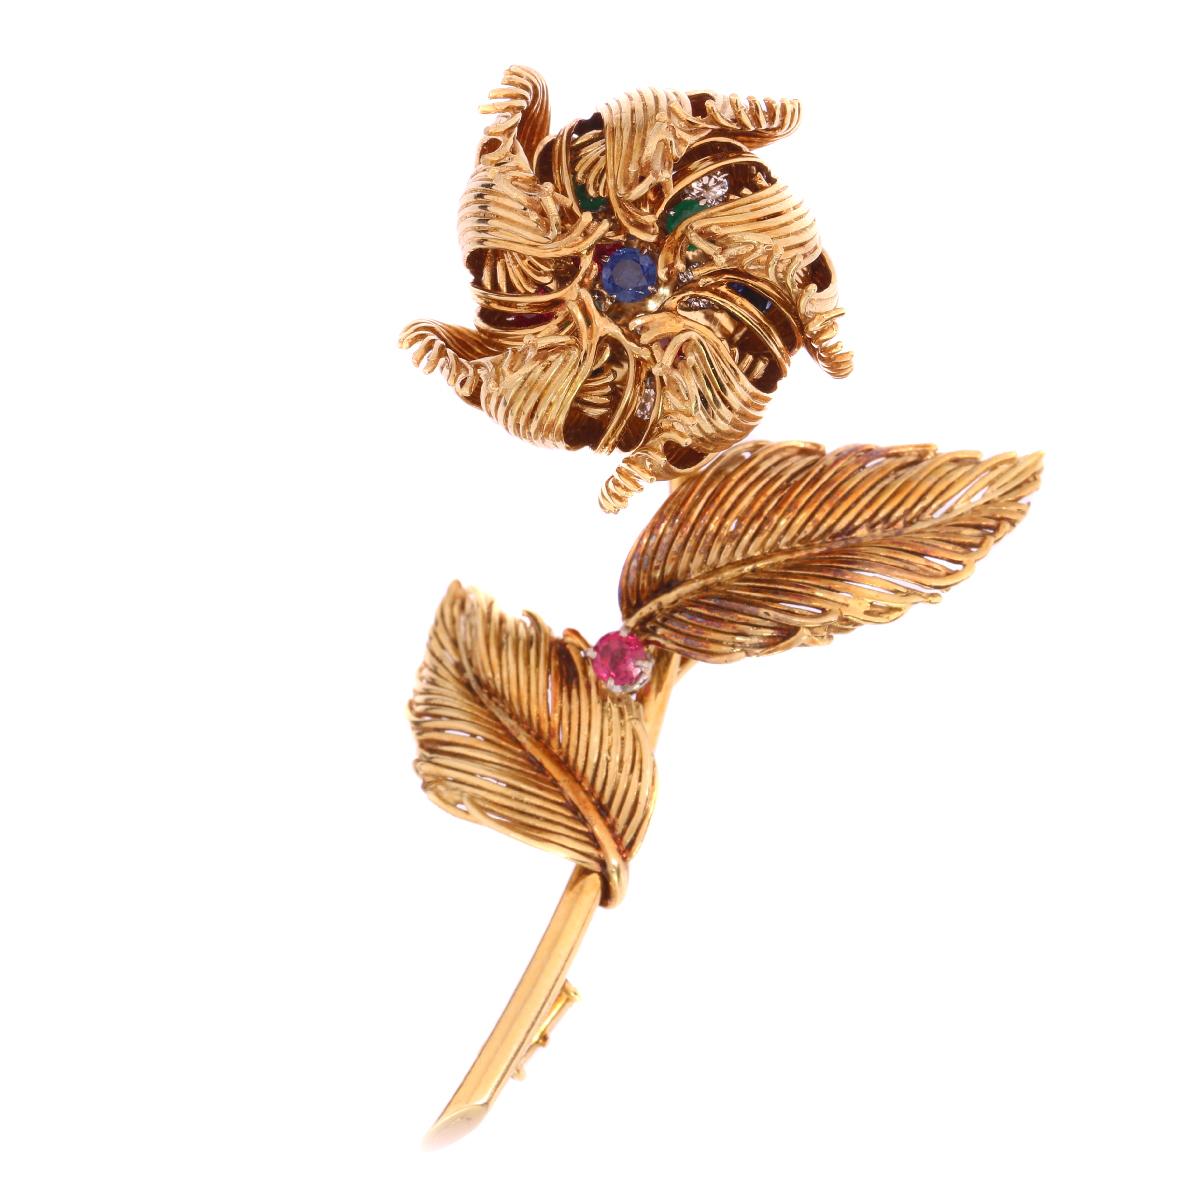 Retro Signed Cartier Vintage Trembleuse Brooch Moveable Flower That Opens or Closes For Sale